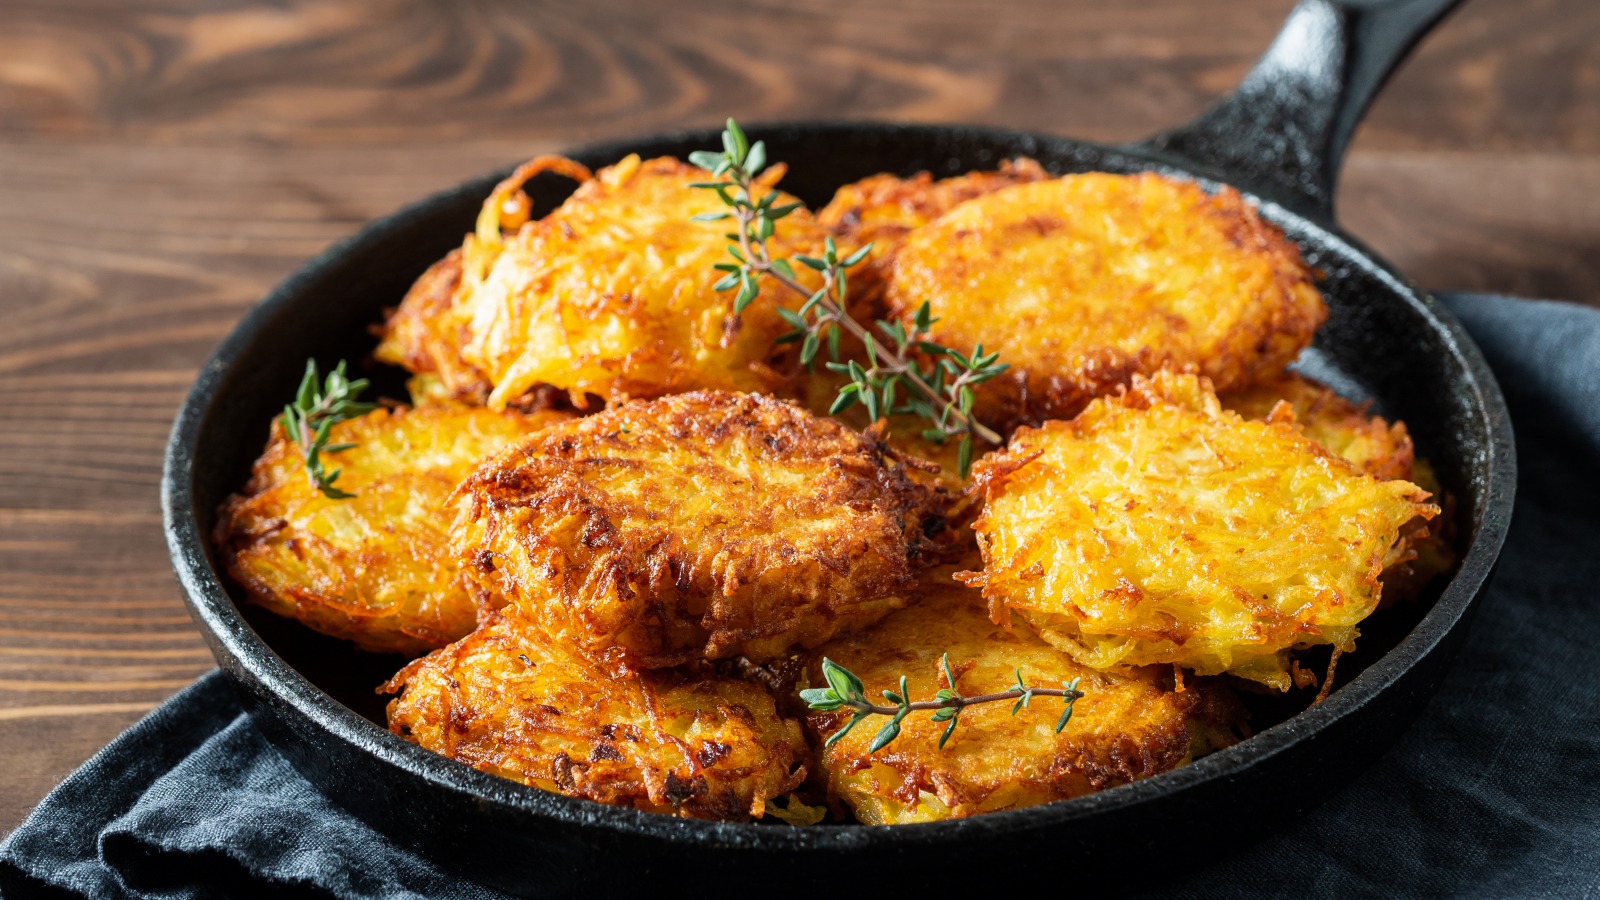 What is the difference between hash browns and potato cakes?